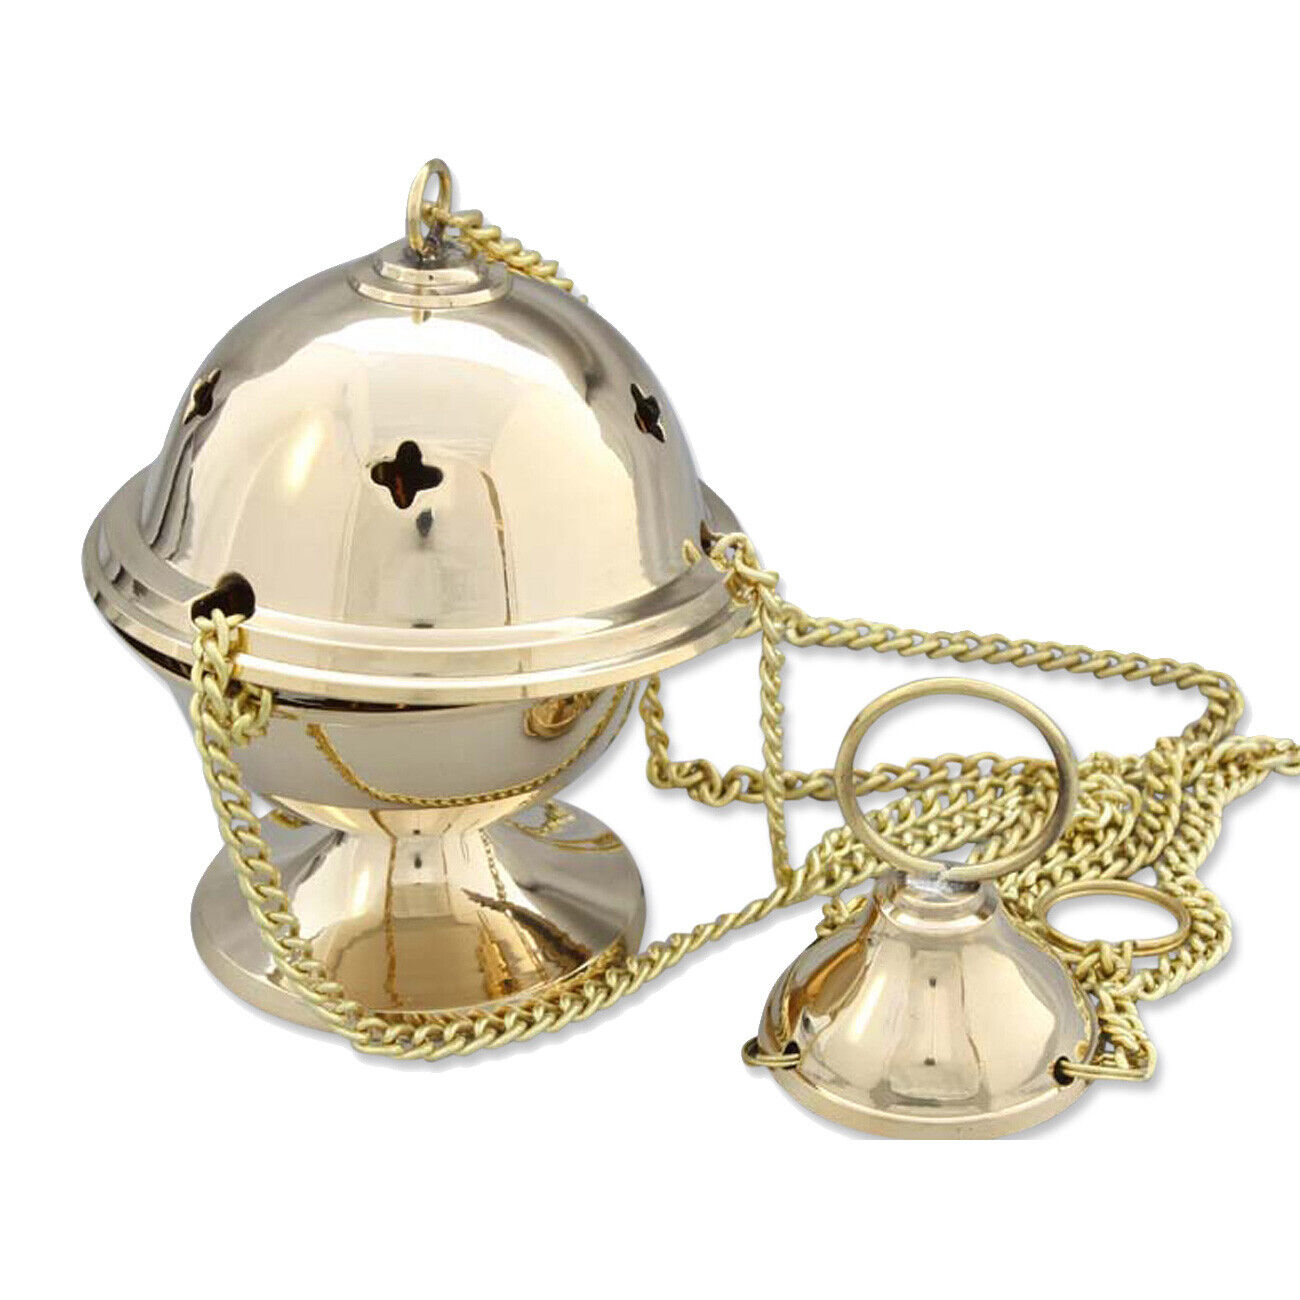 Incense Burner with Chain Handmade Incense Burner Deco Esoteric Gold New 1312